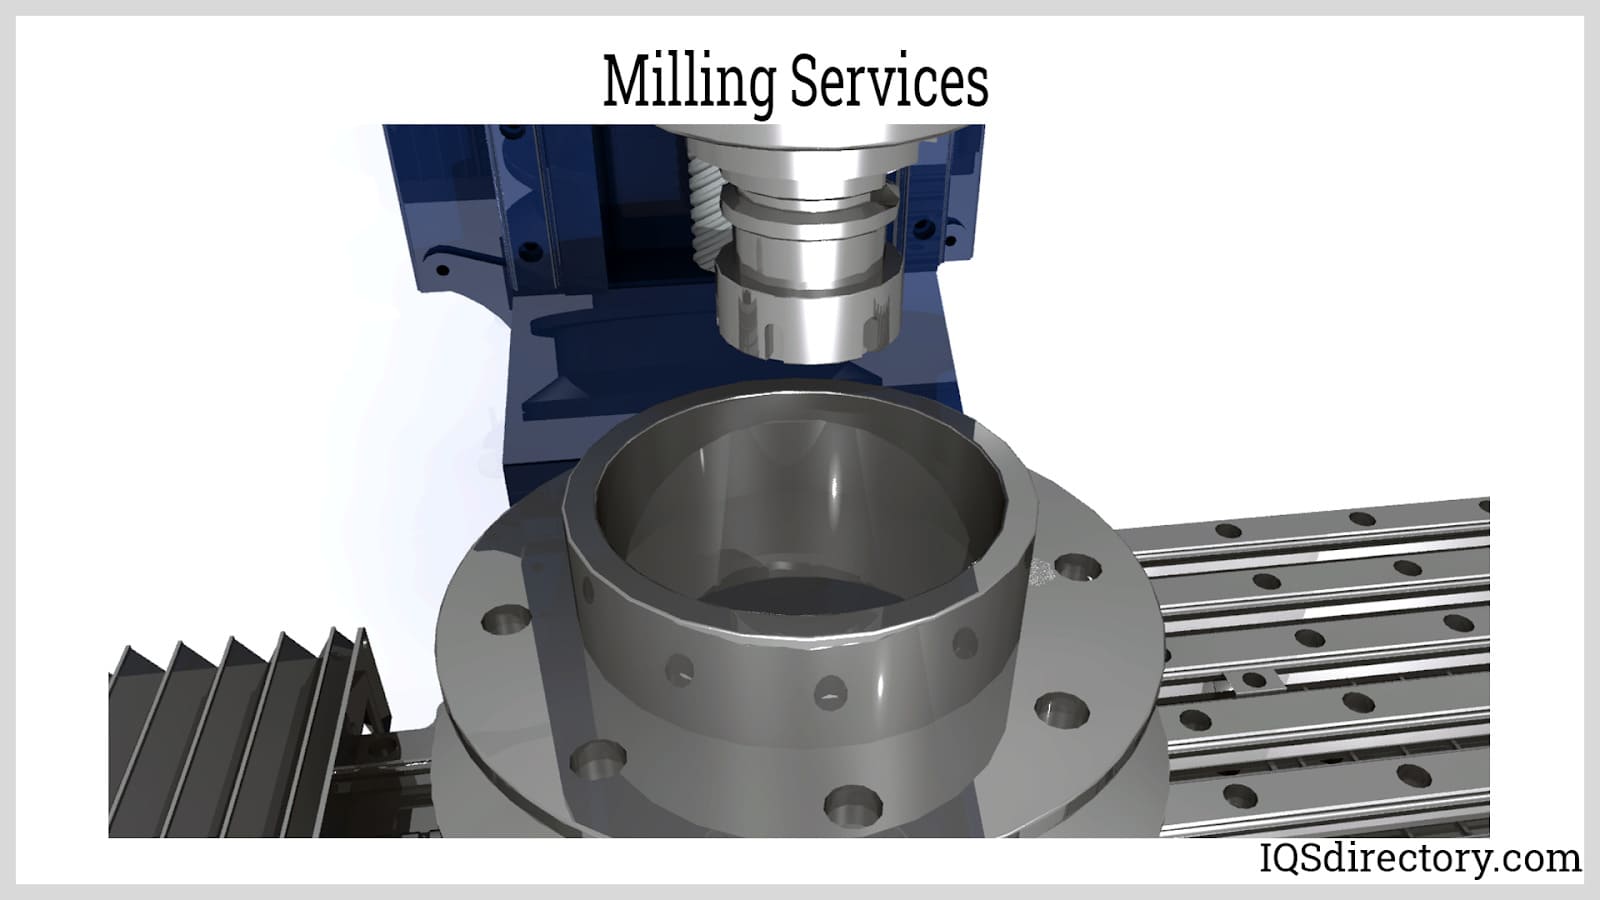 Milling Services